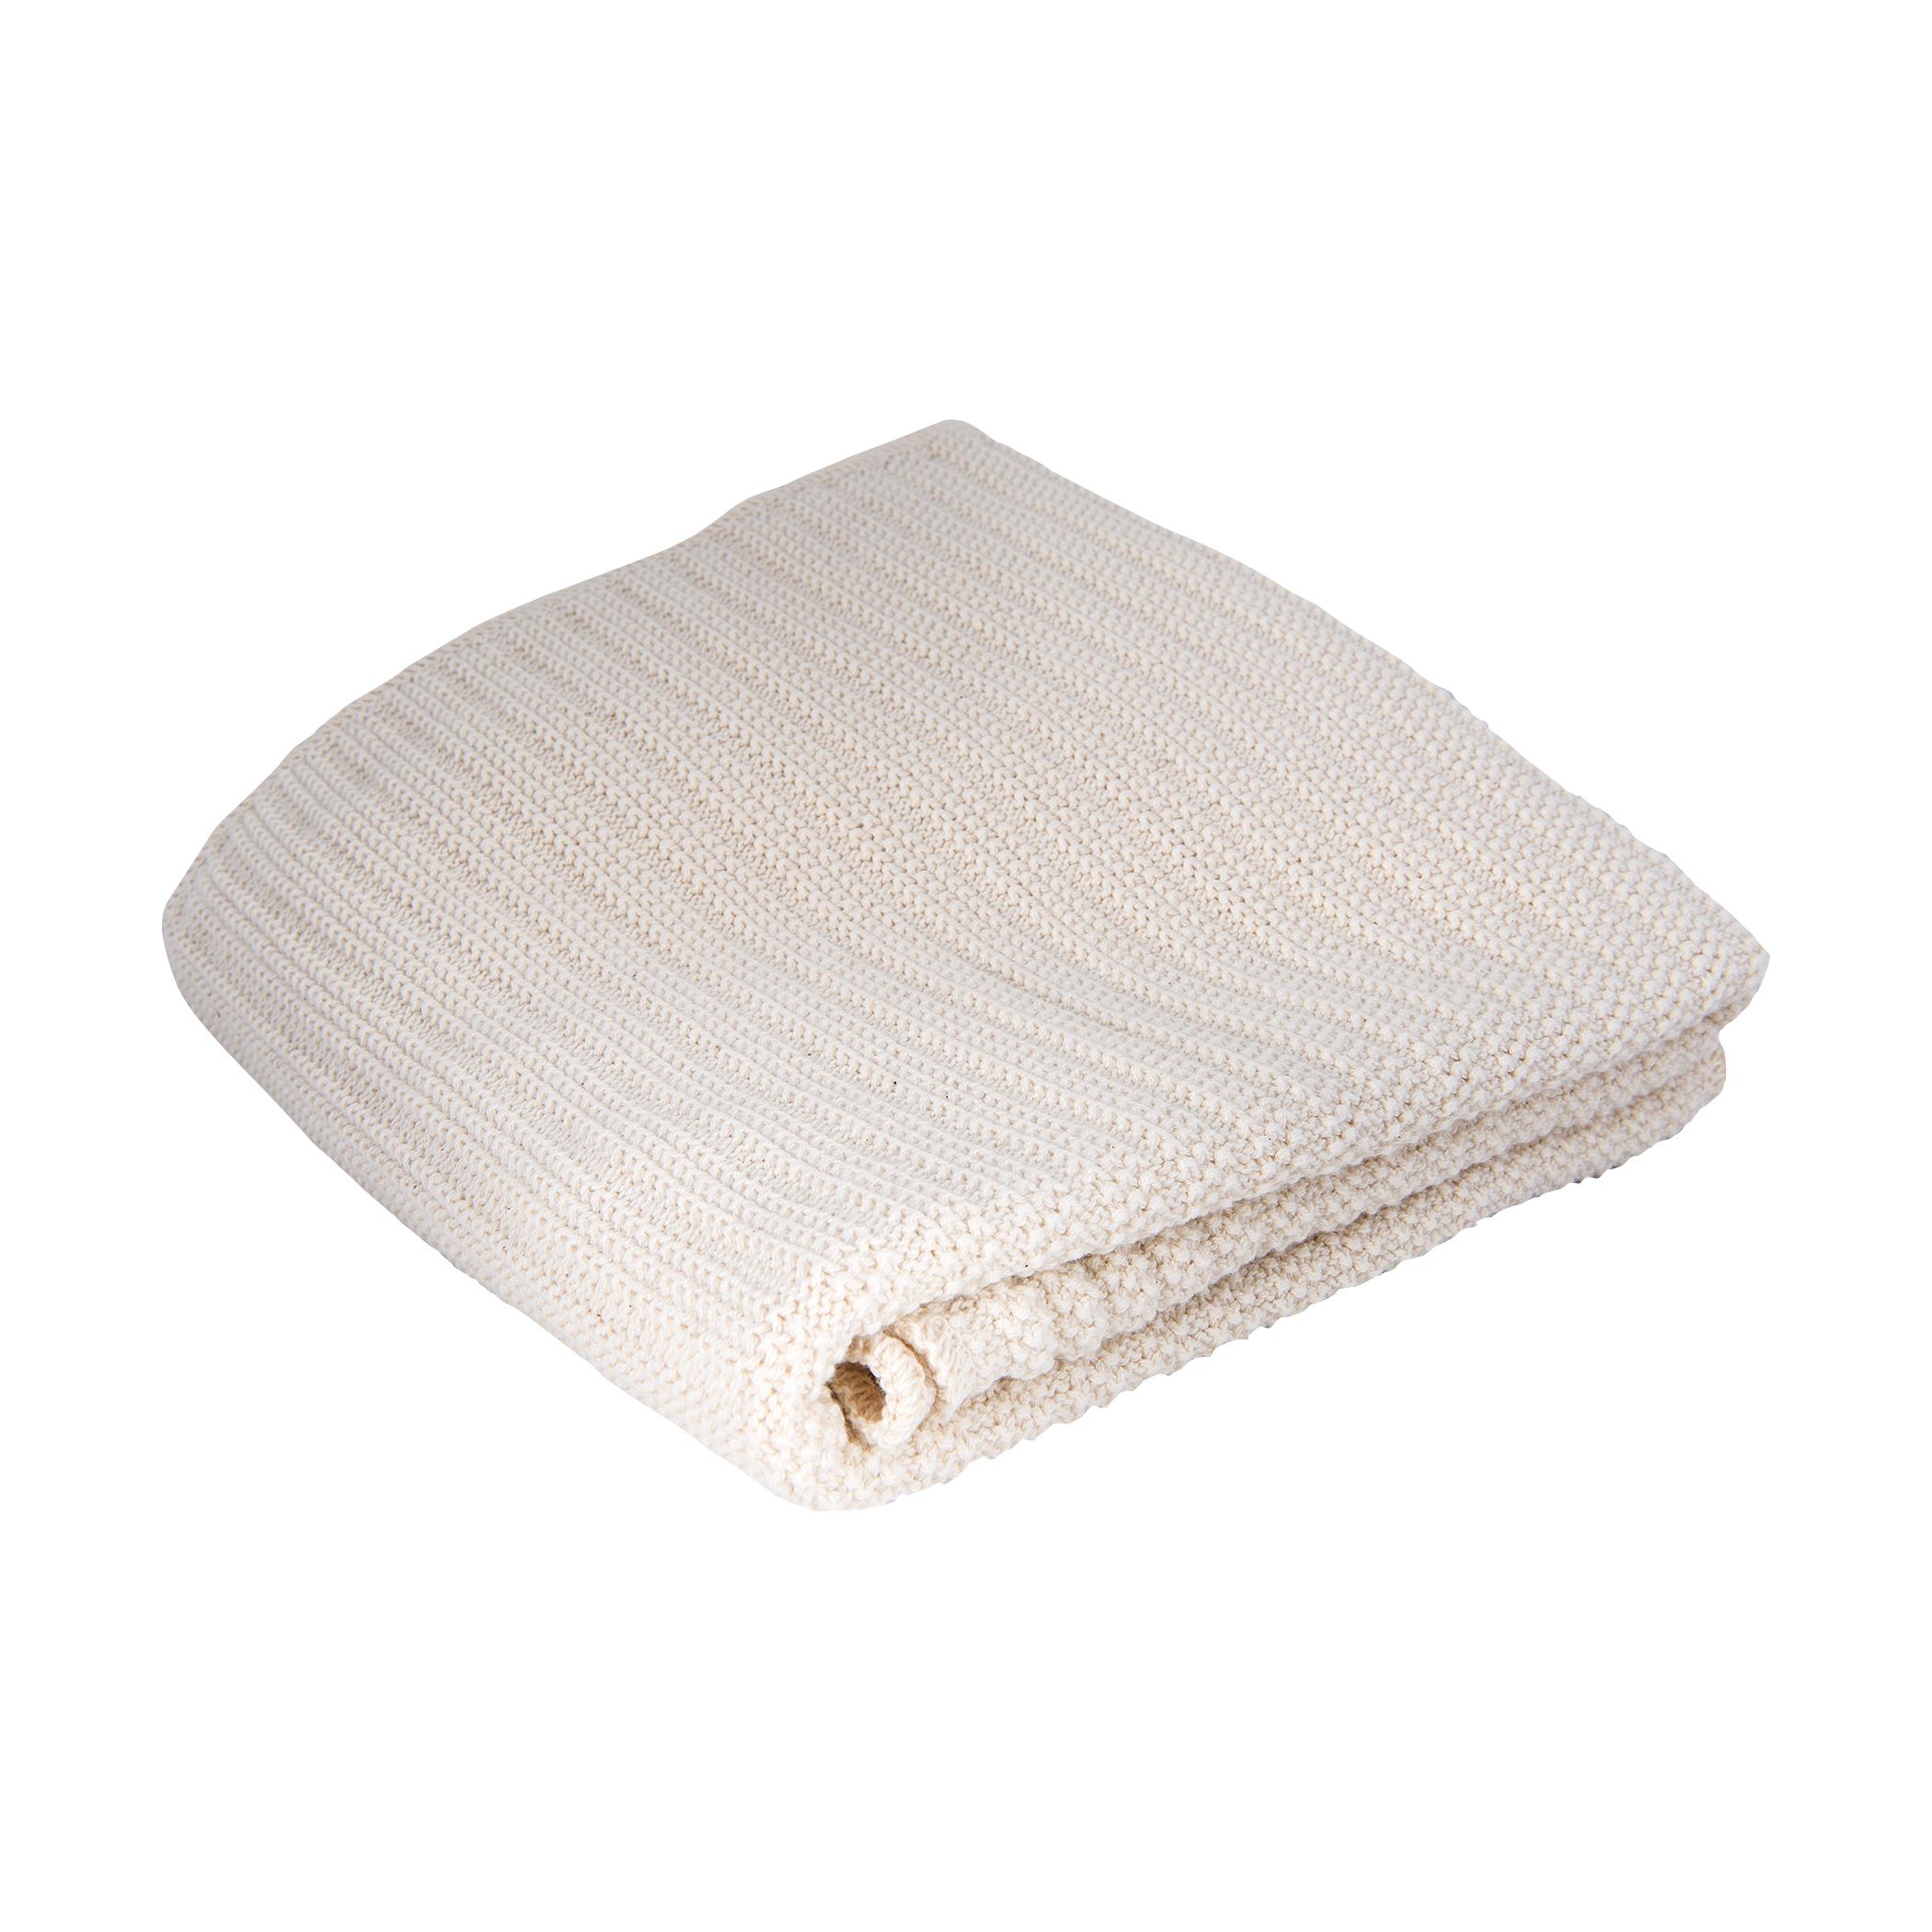 MAST GENERAL STORE Cotton Knit Baby Blanket